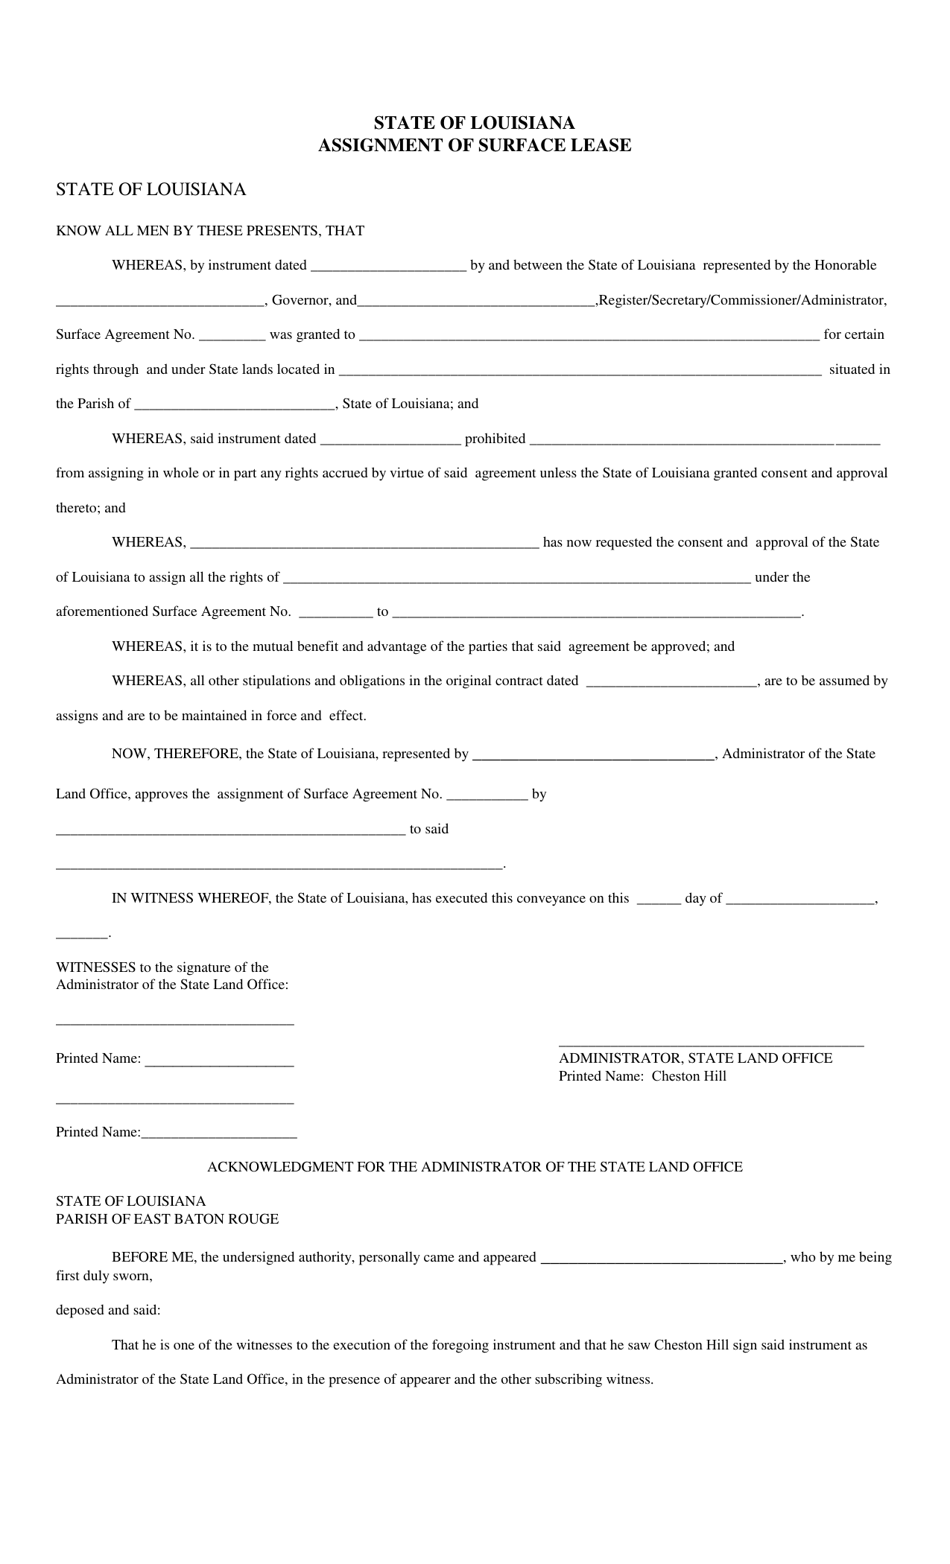 Assignment of Surface Lease - Louisiana, Page 1